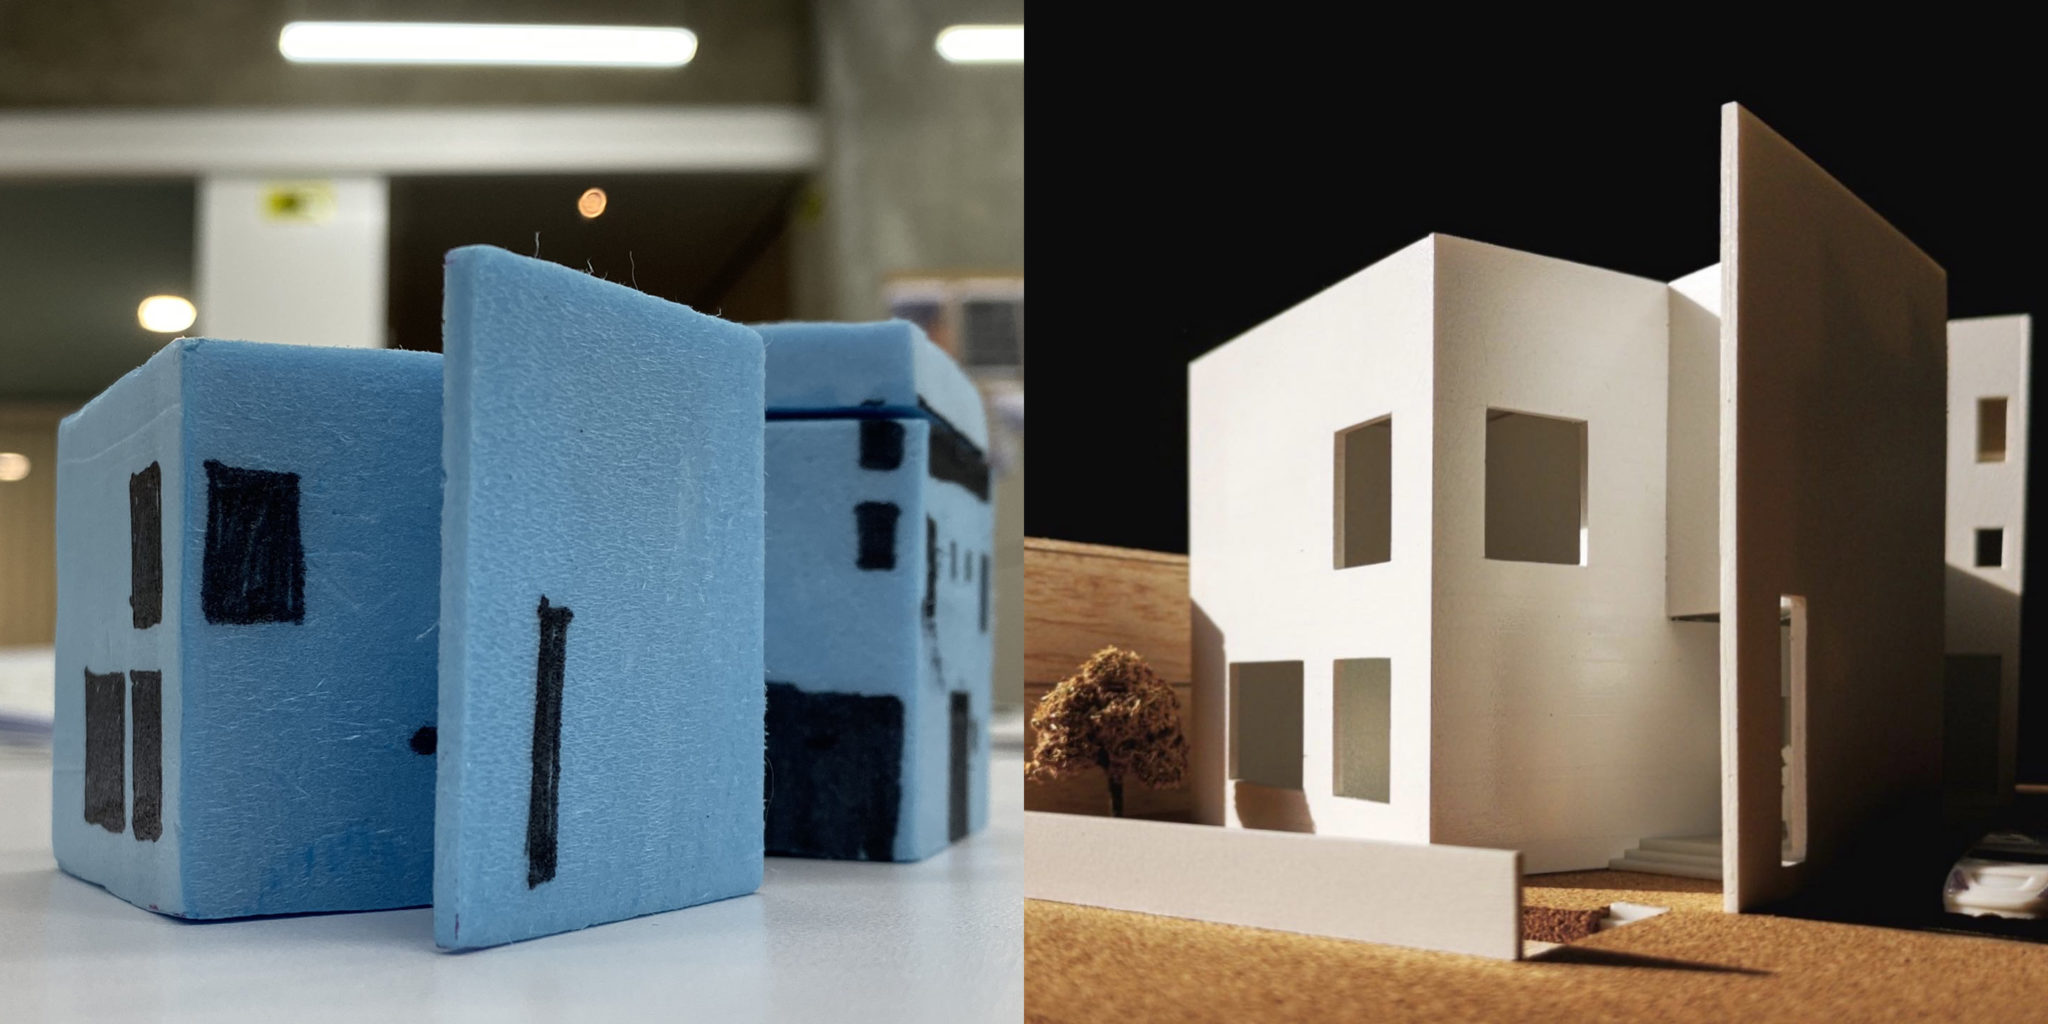 Massing and presentation model of a house using blue foam and bristol boards